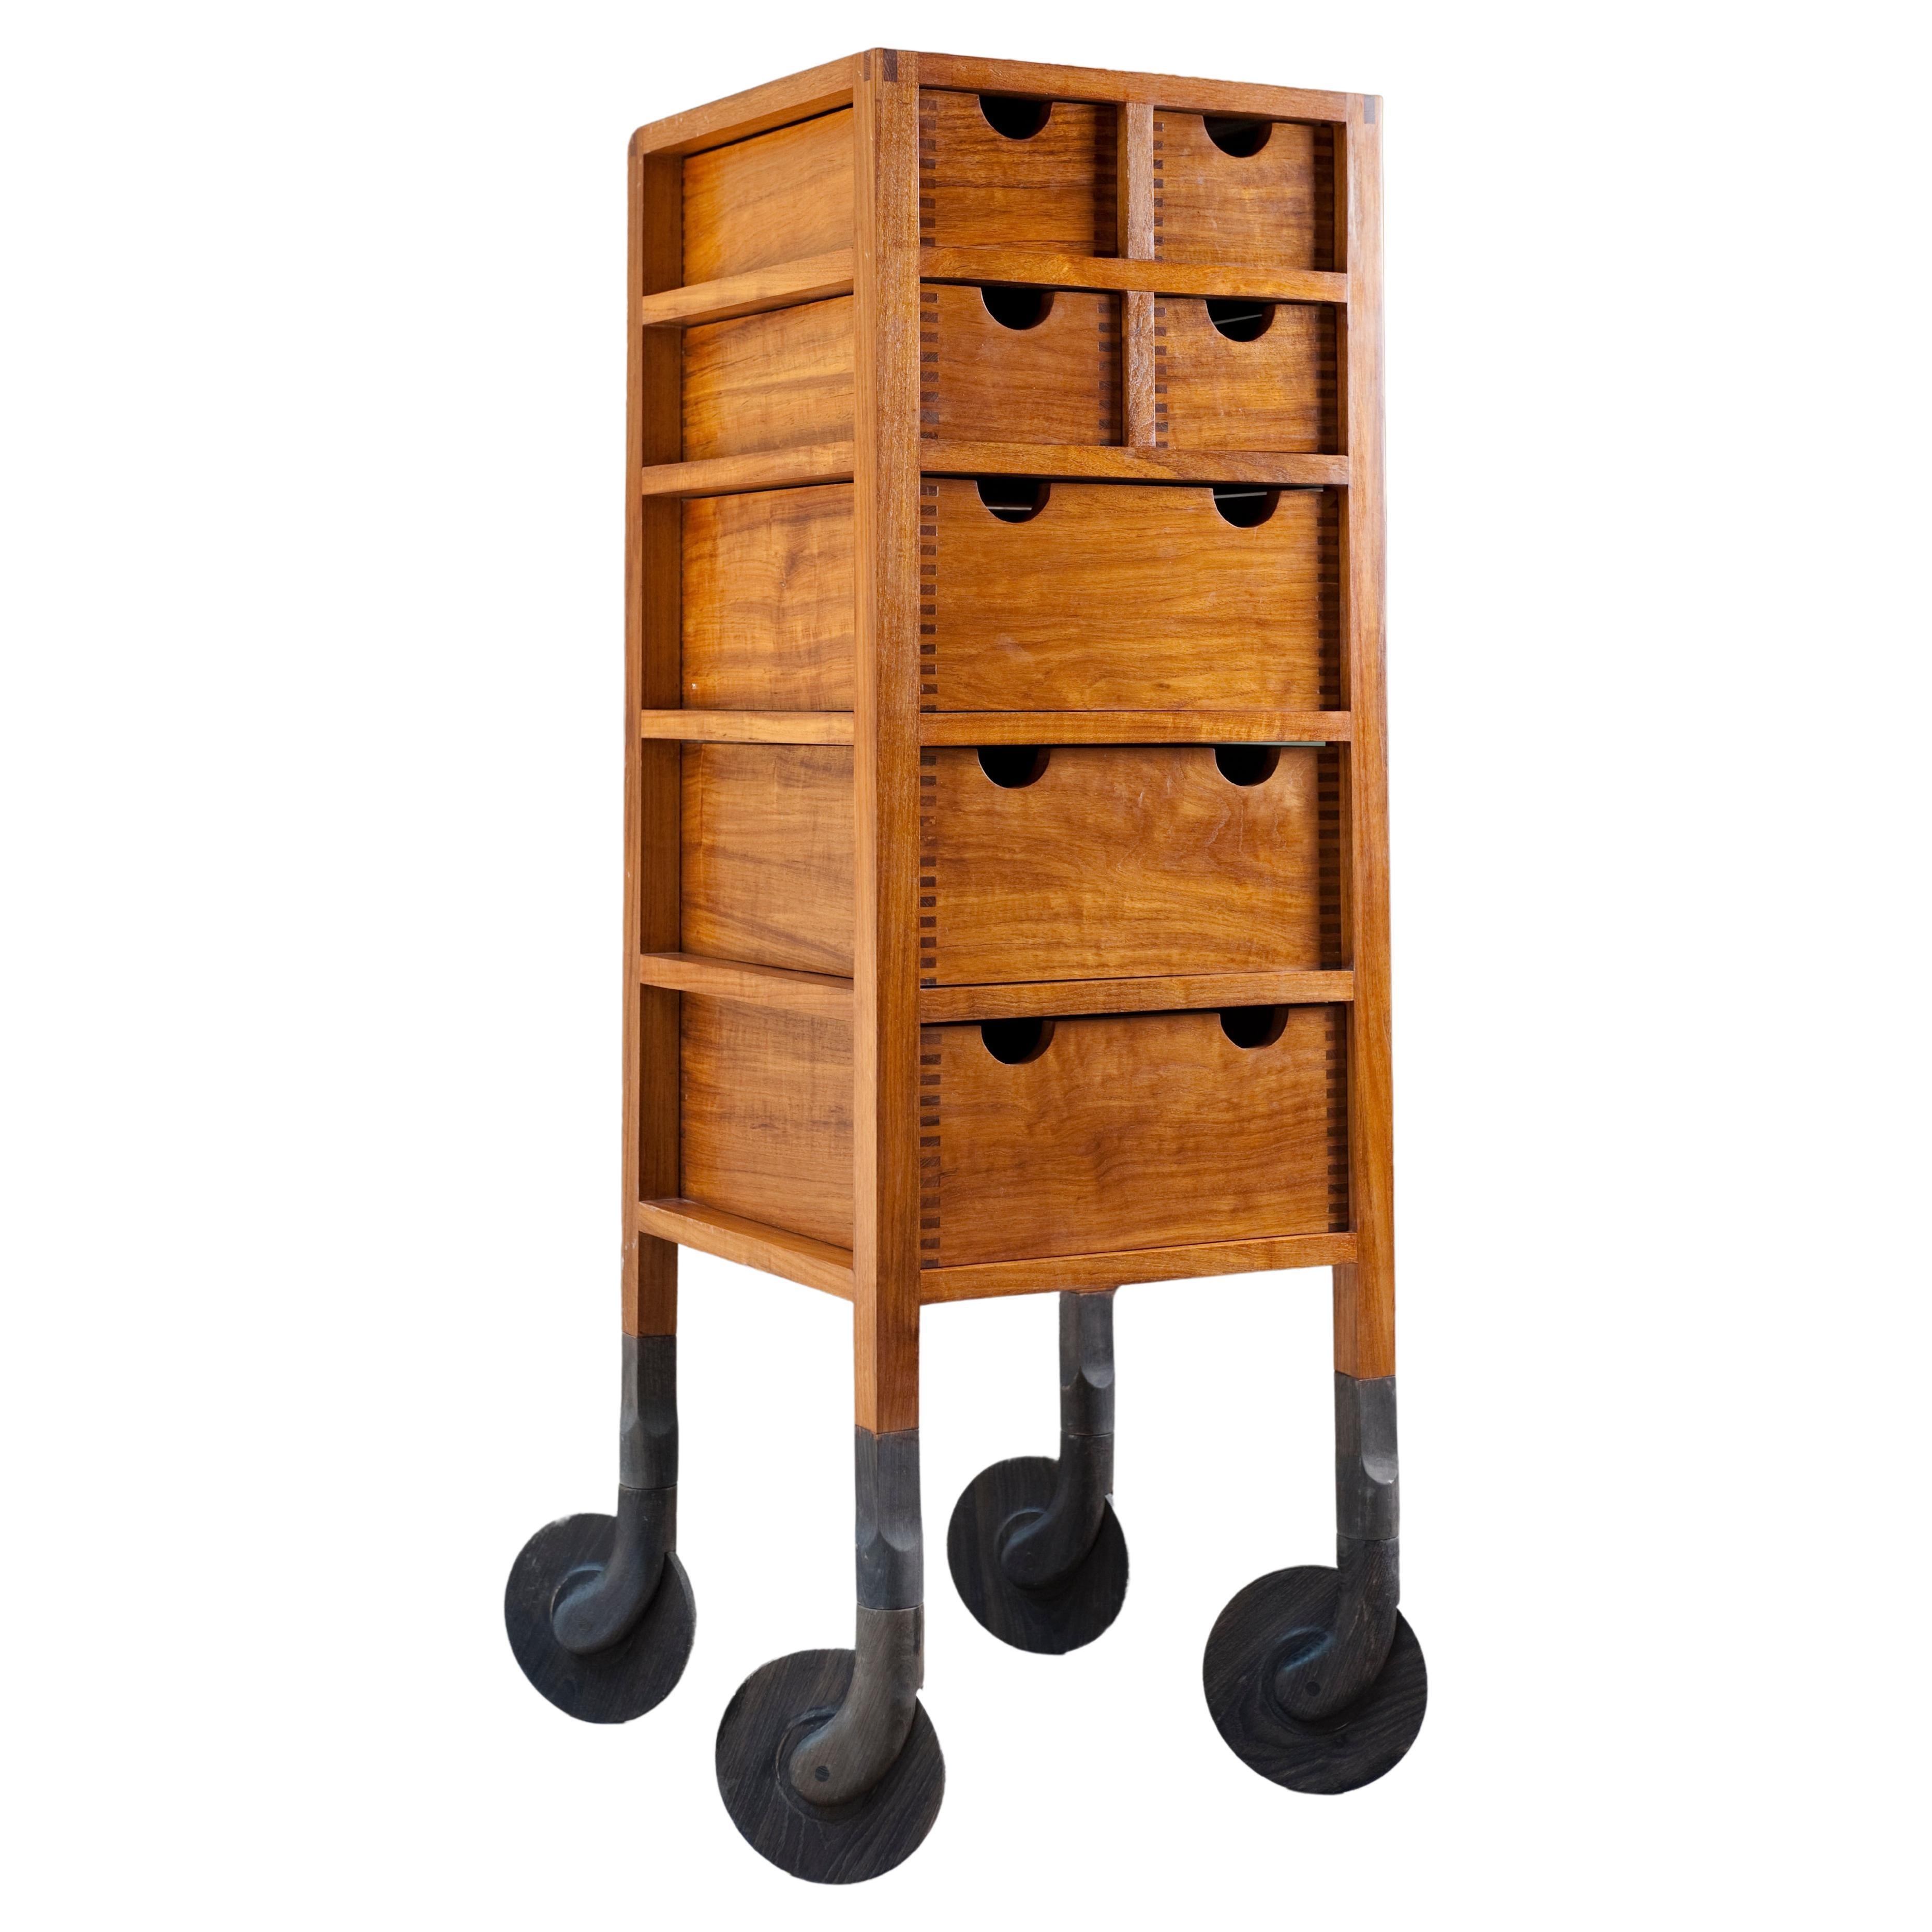 AKMD Rolling Dresser 'High, Dark Wood' all solid wood with wooden casters/wheels For Sale